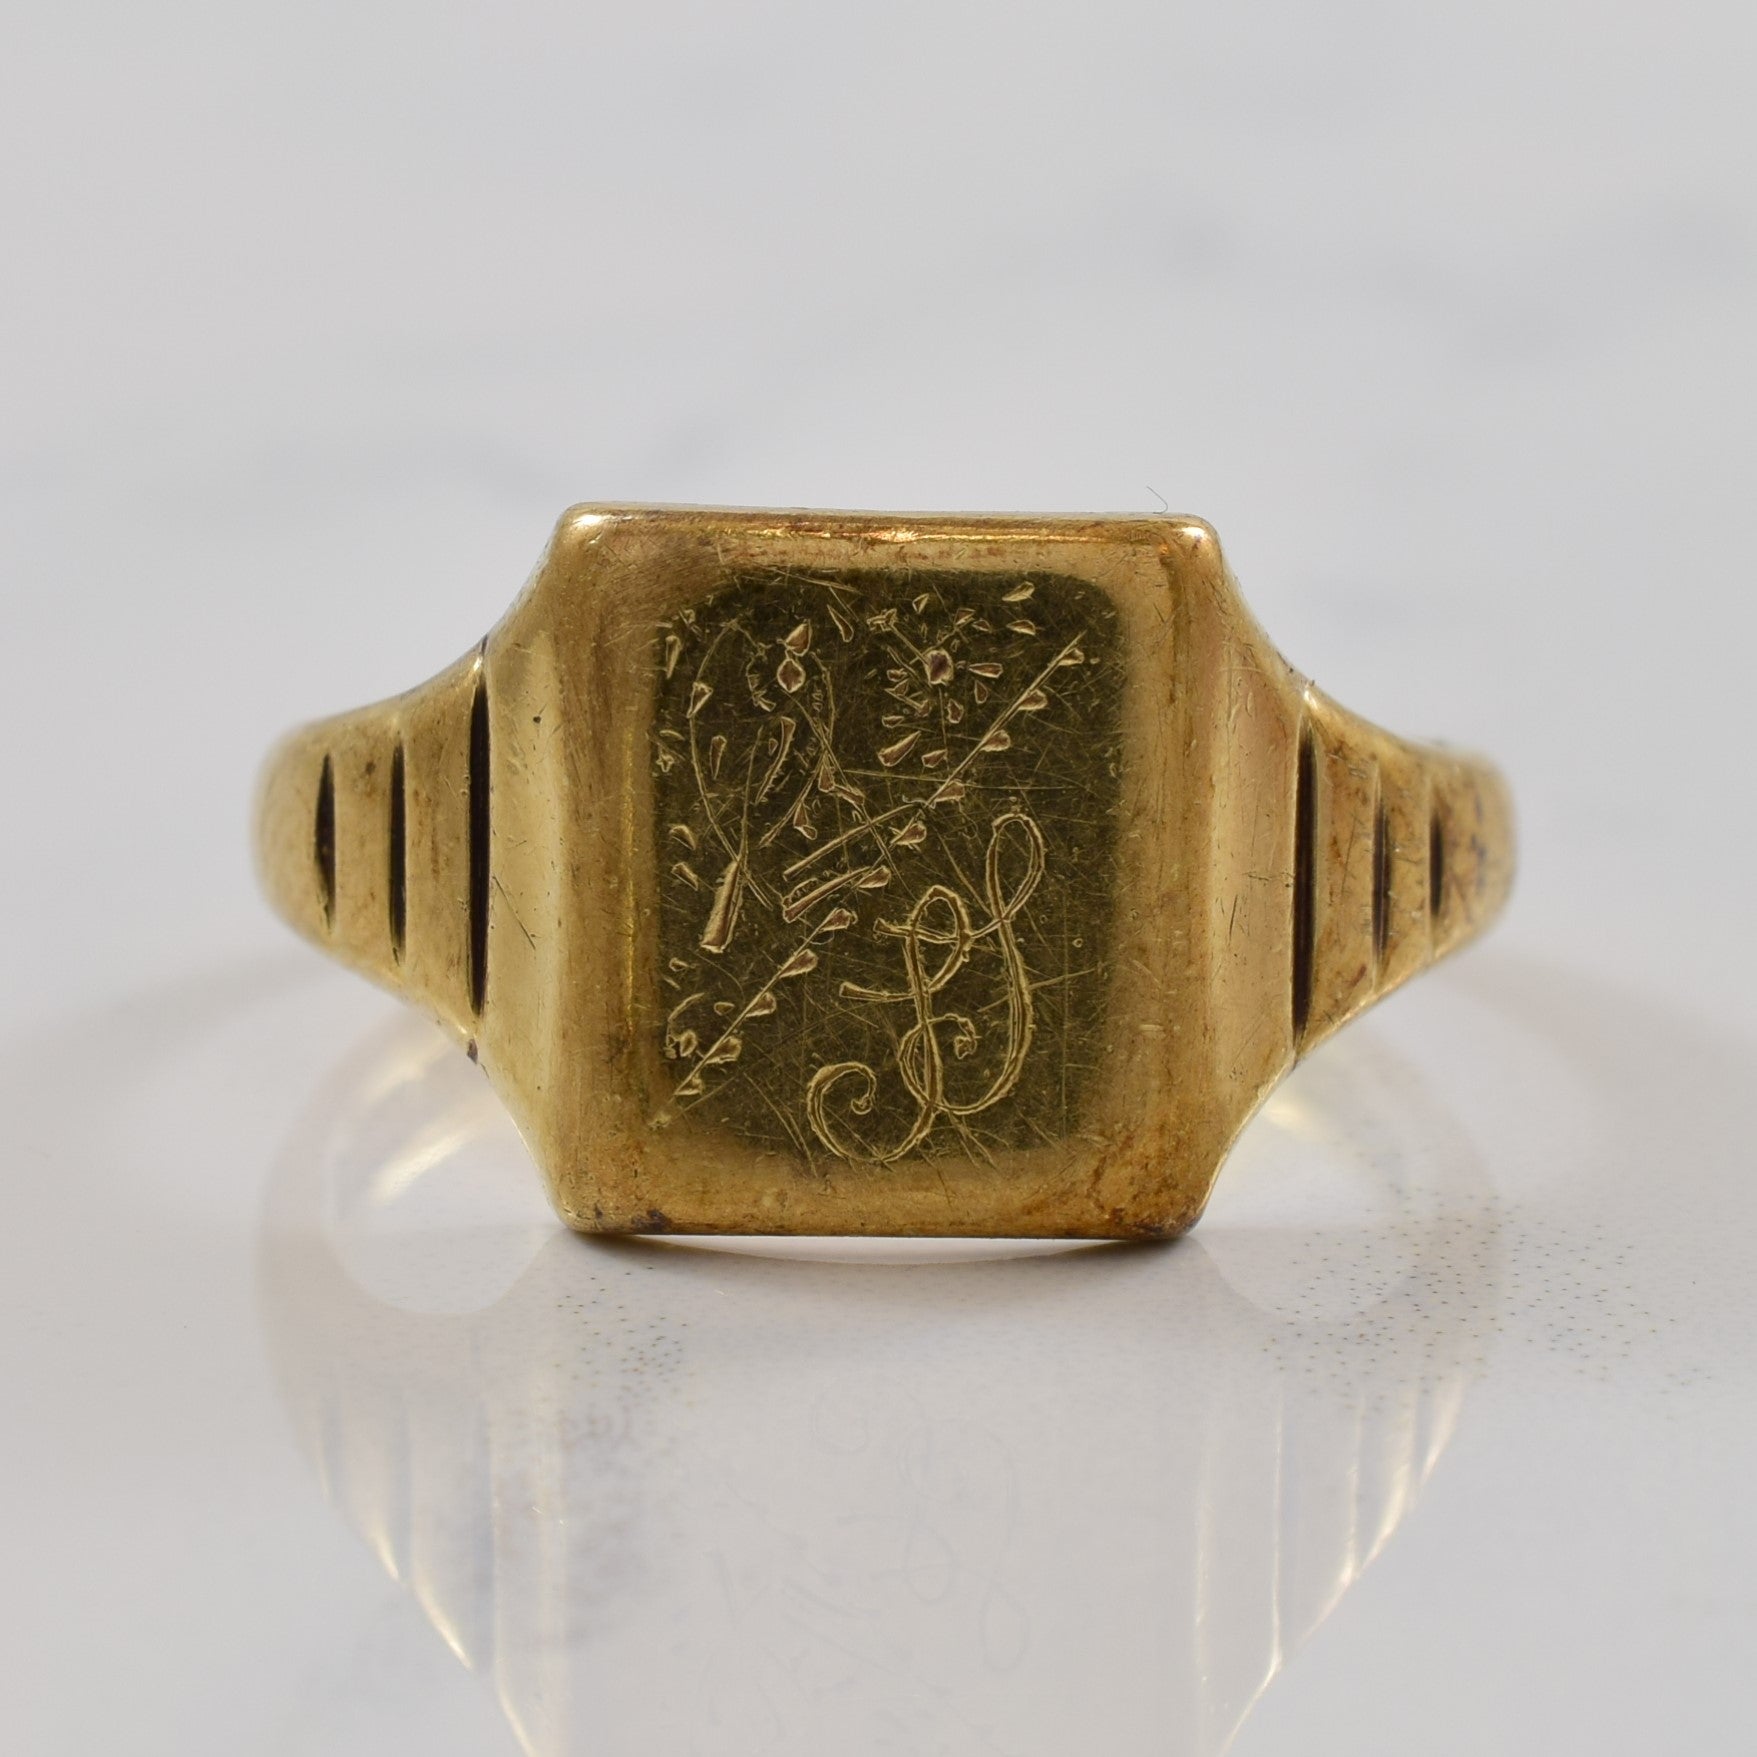 1960s Engraved Intials 'SS' Signet Ring | SZ 10.75 |